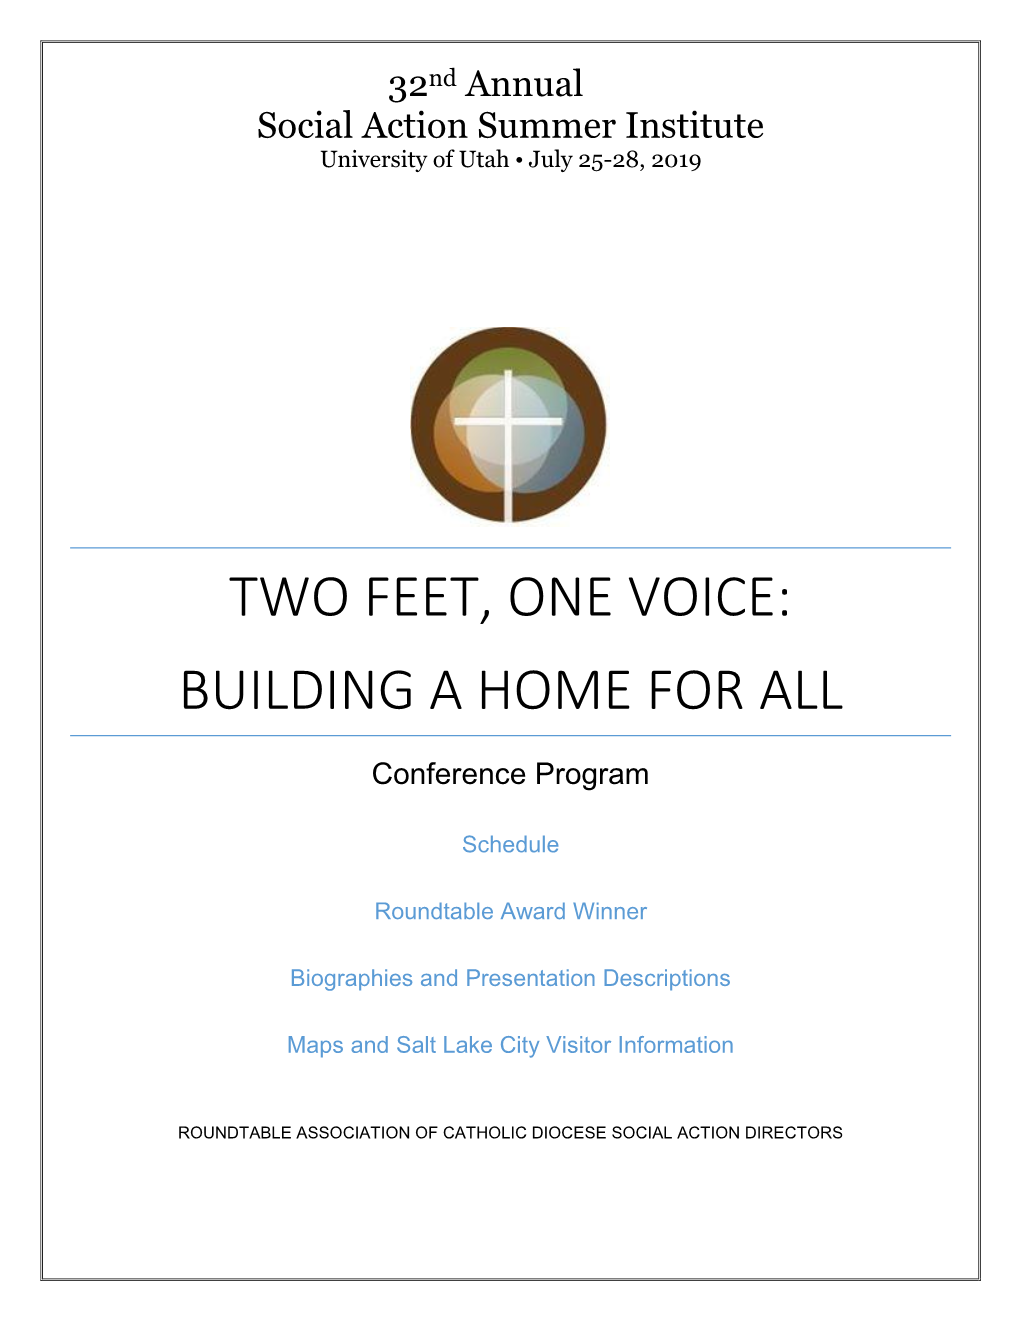 Two Feet, One Voice: Building a Home for All